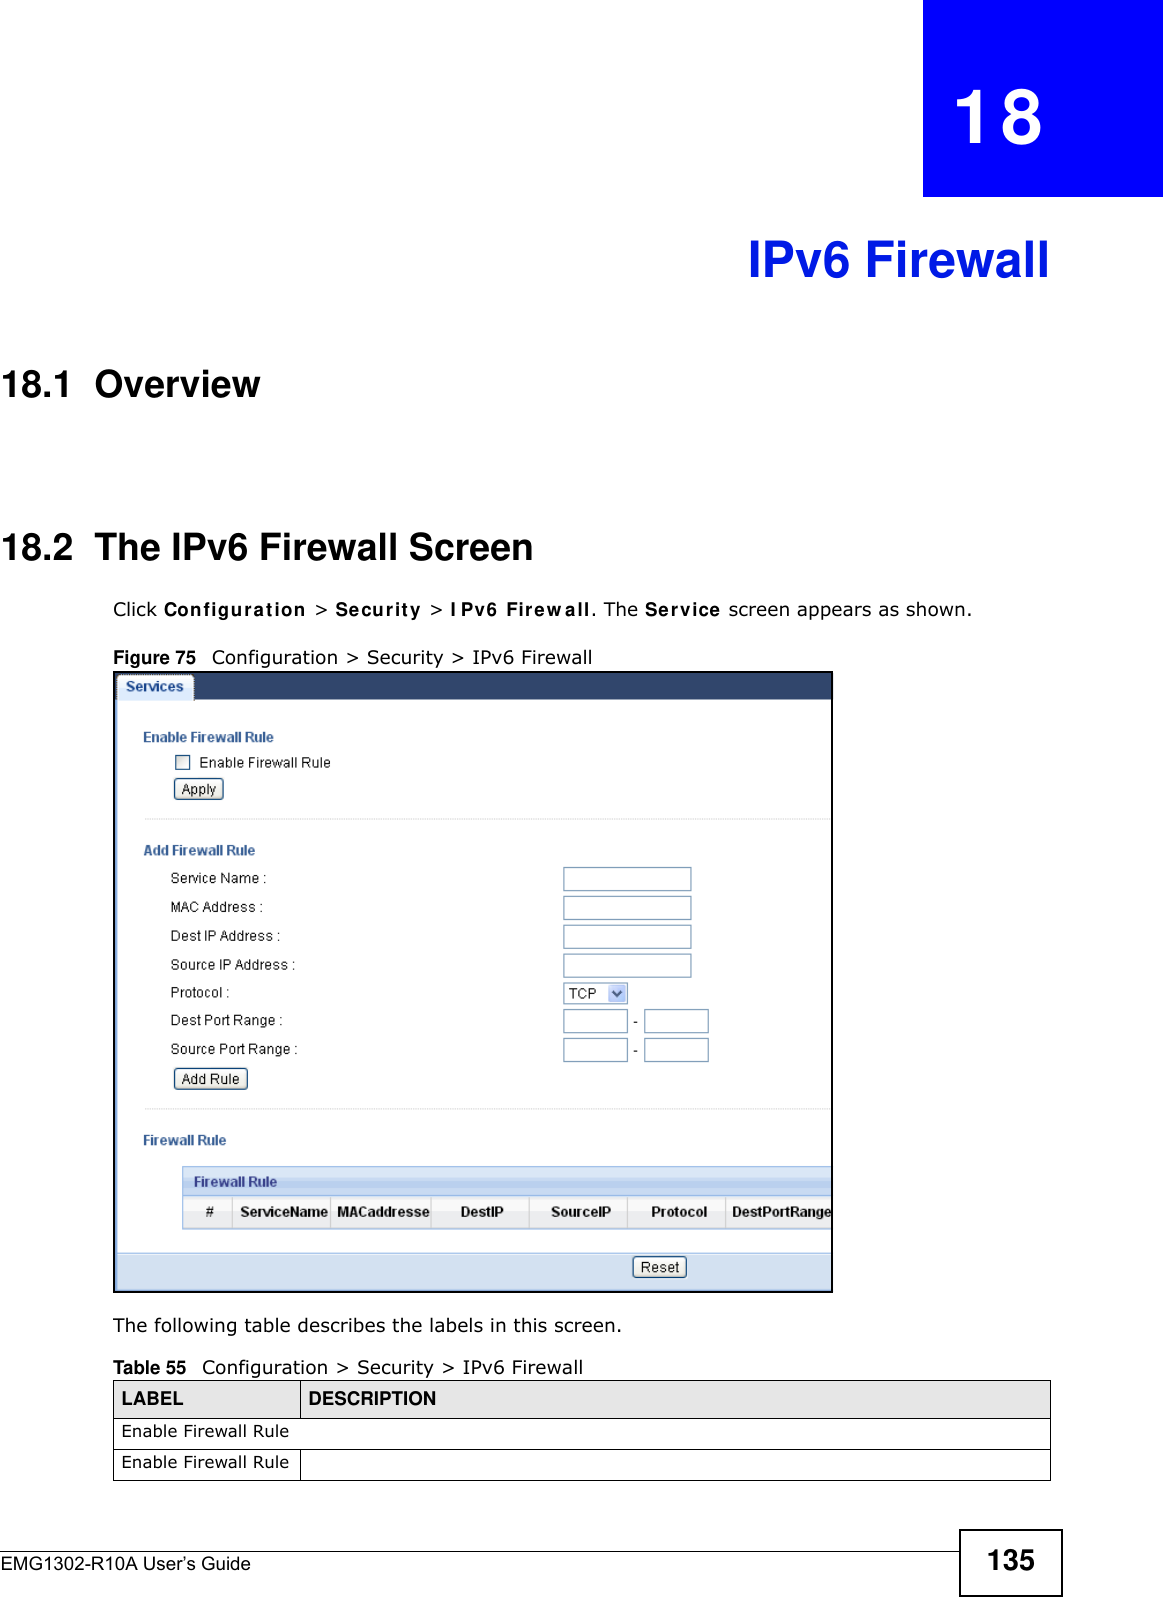 EMG1302-R10A User’s Guide 135CHAPTER   18IPv6 Firewall18.1  Overview 18.2  The IPv6 Firewall Screen Click Configu r a t ion  &gt; Securit y &gt; I Pv6  Firew all. The Se rvice  screen appears as shown.Figure 75   Configuration &gt; Security &gt; IPv6 FirewallThe following table describes the labels in this screen.Table 55   Configuration &gt; Security &gt; IPv6 FirewallLABEL DESCRIPTIONEnable Firewall RuleEnable Firewall Rule